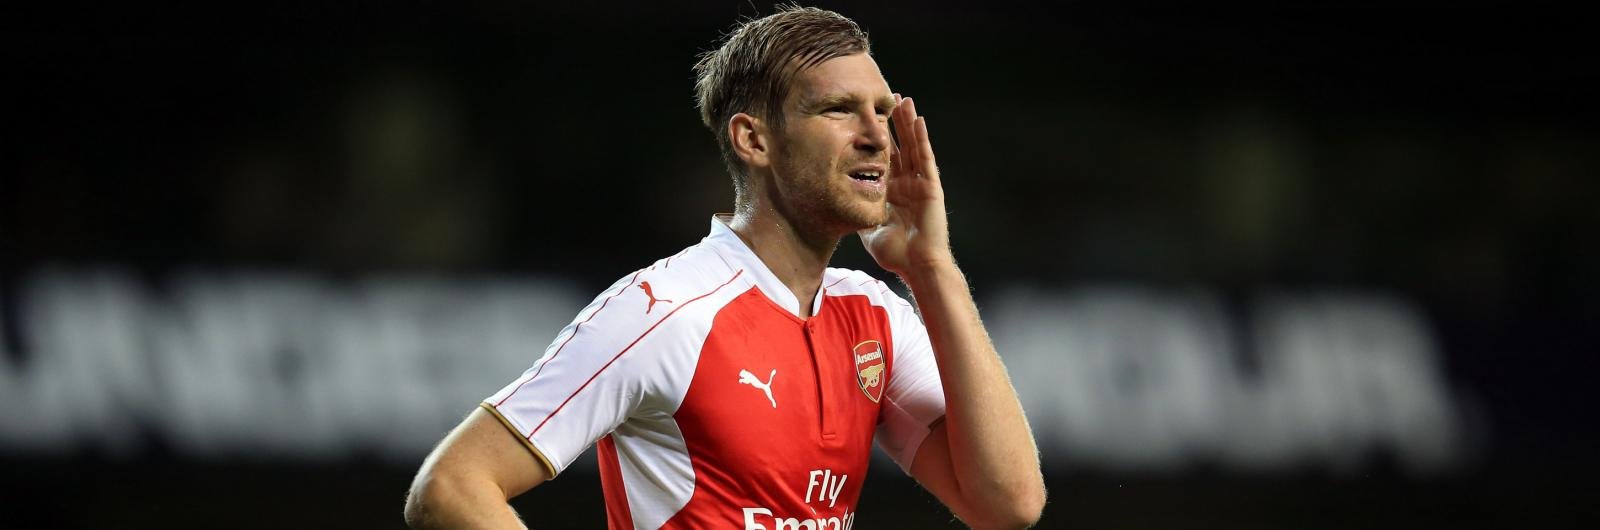 “A renewal with Arsenal is my absolute priority” says 32-year-old star